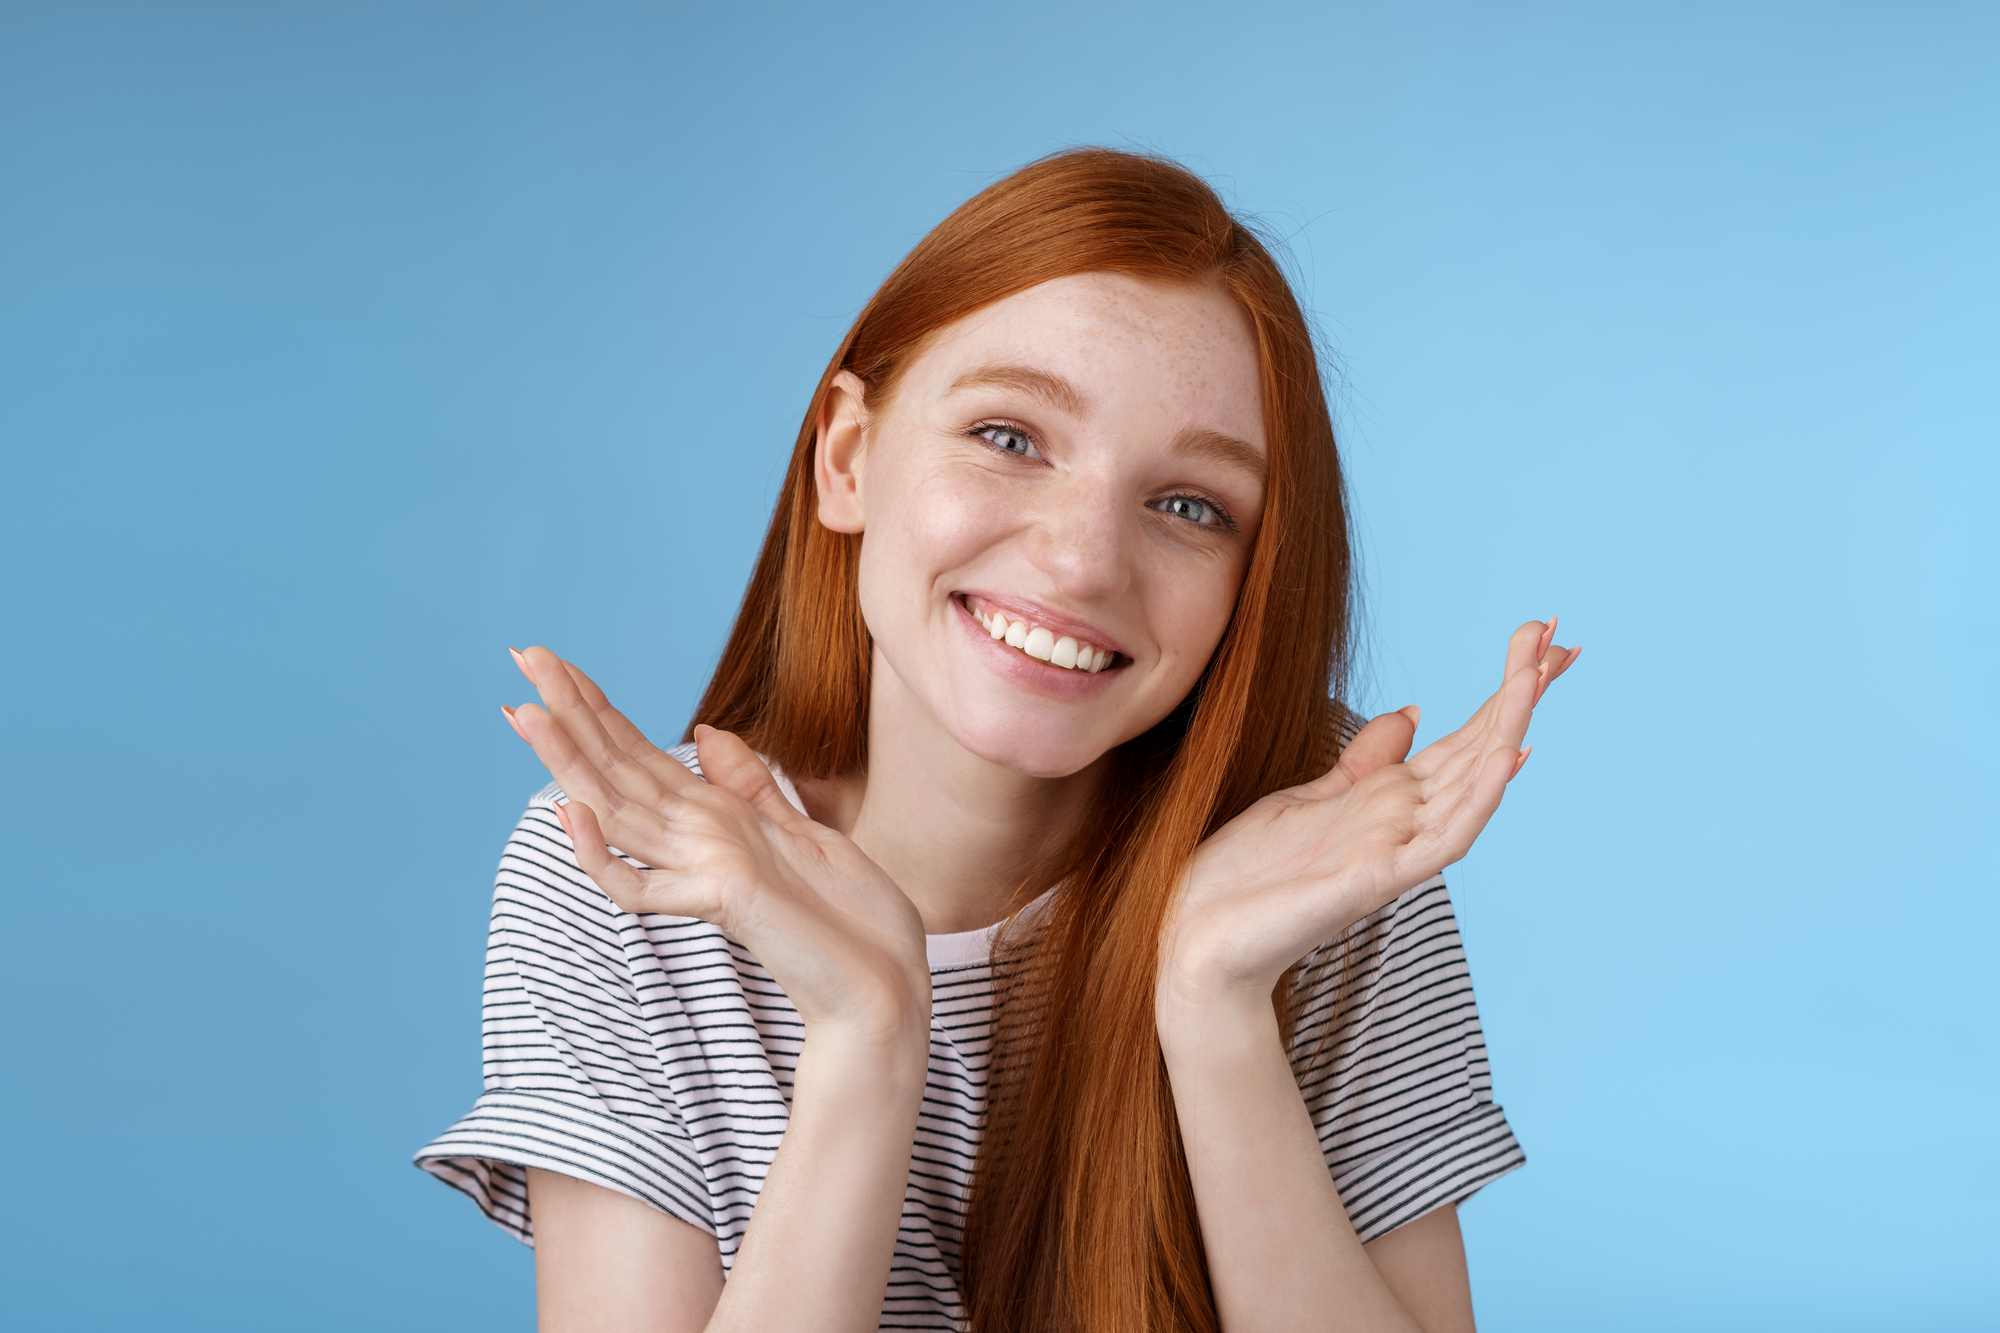 A smiling young woman with long red hair is wearing a striped t-shirt and holding her hands up near her face in a playful gesture. She is standing against a solid light blue background.